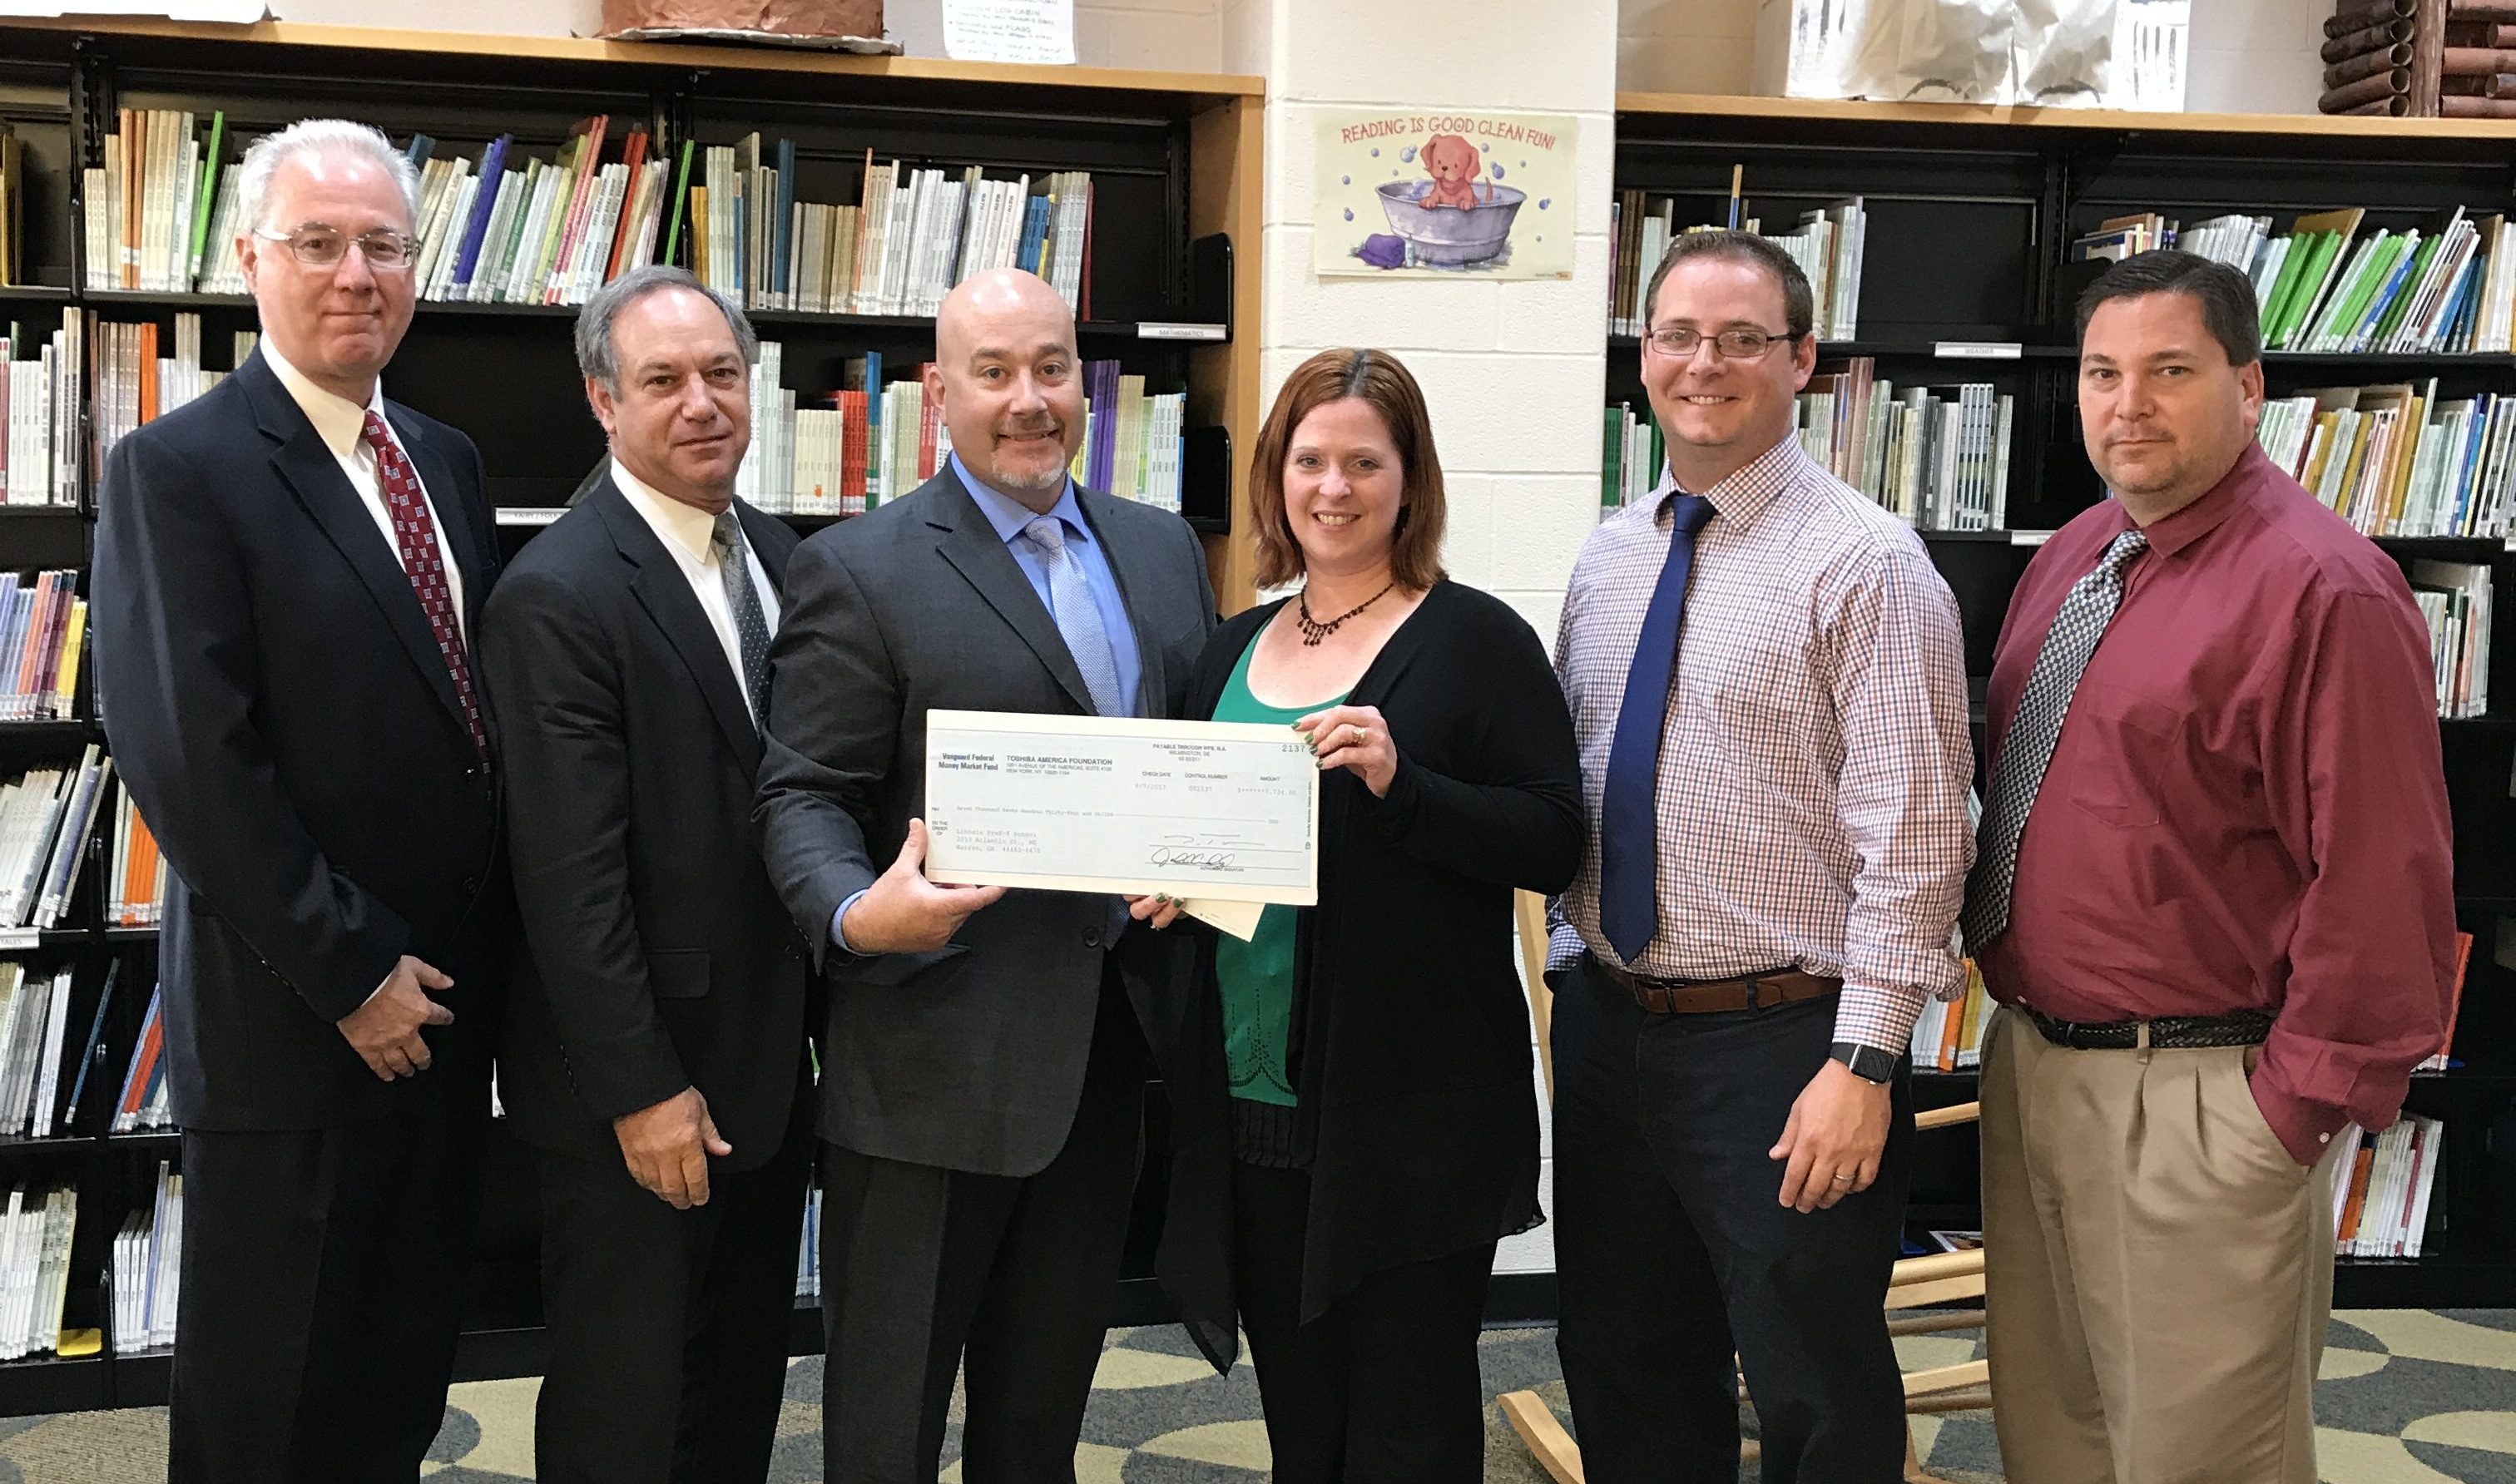 Christine Depascale, John DeSantis, and Steve Chiaro pose for a picture as representatives from Toshiba present them with a check to fund two 3D printers